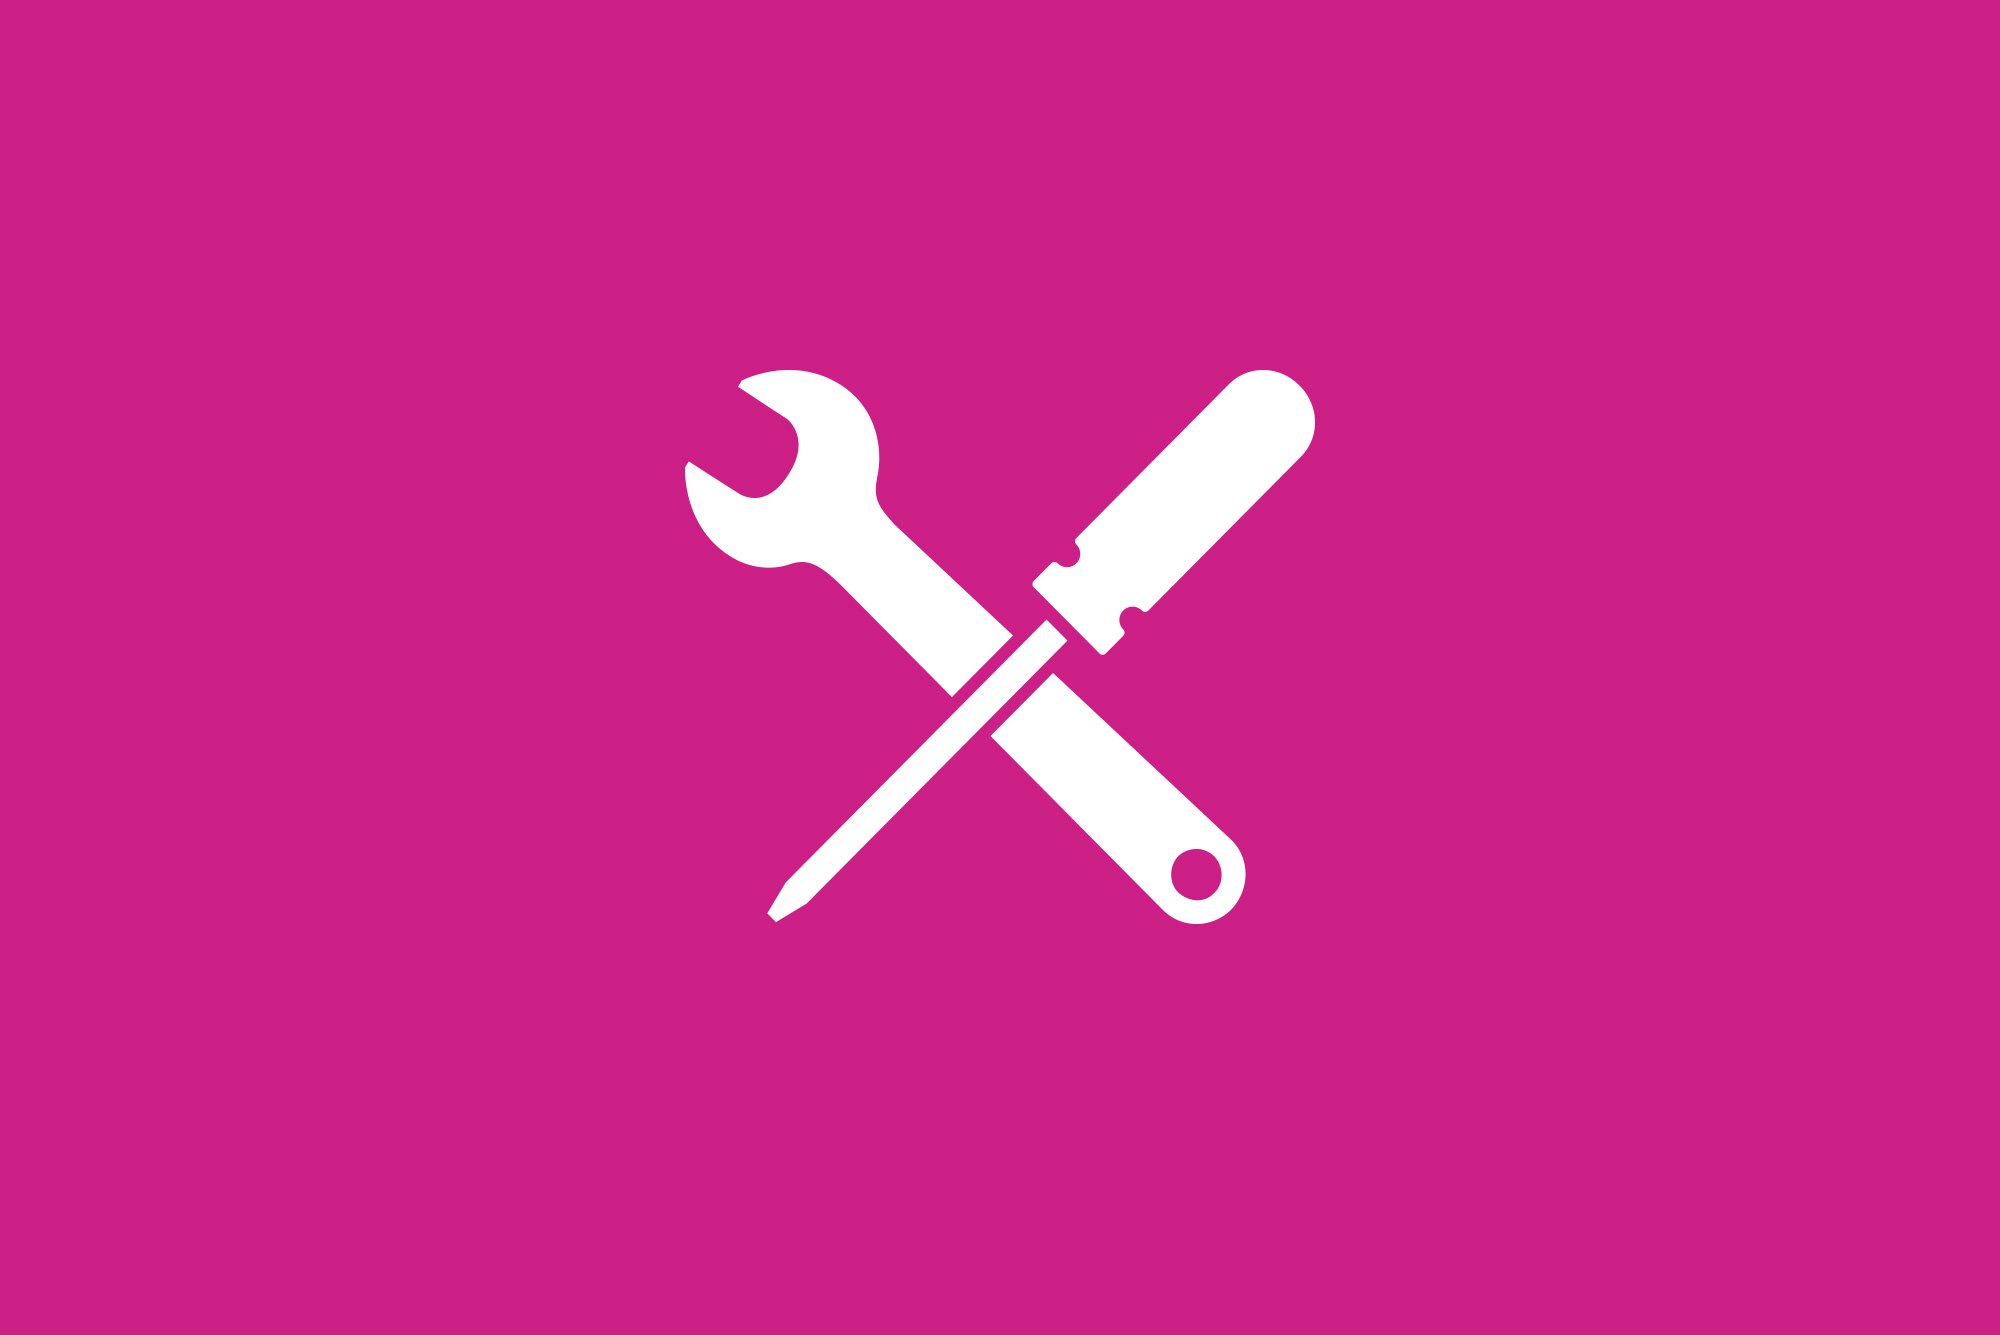 Tool icon on pink background - Website maintenance